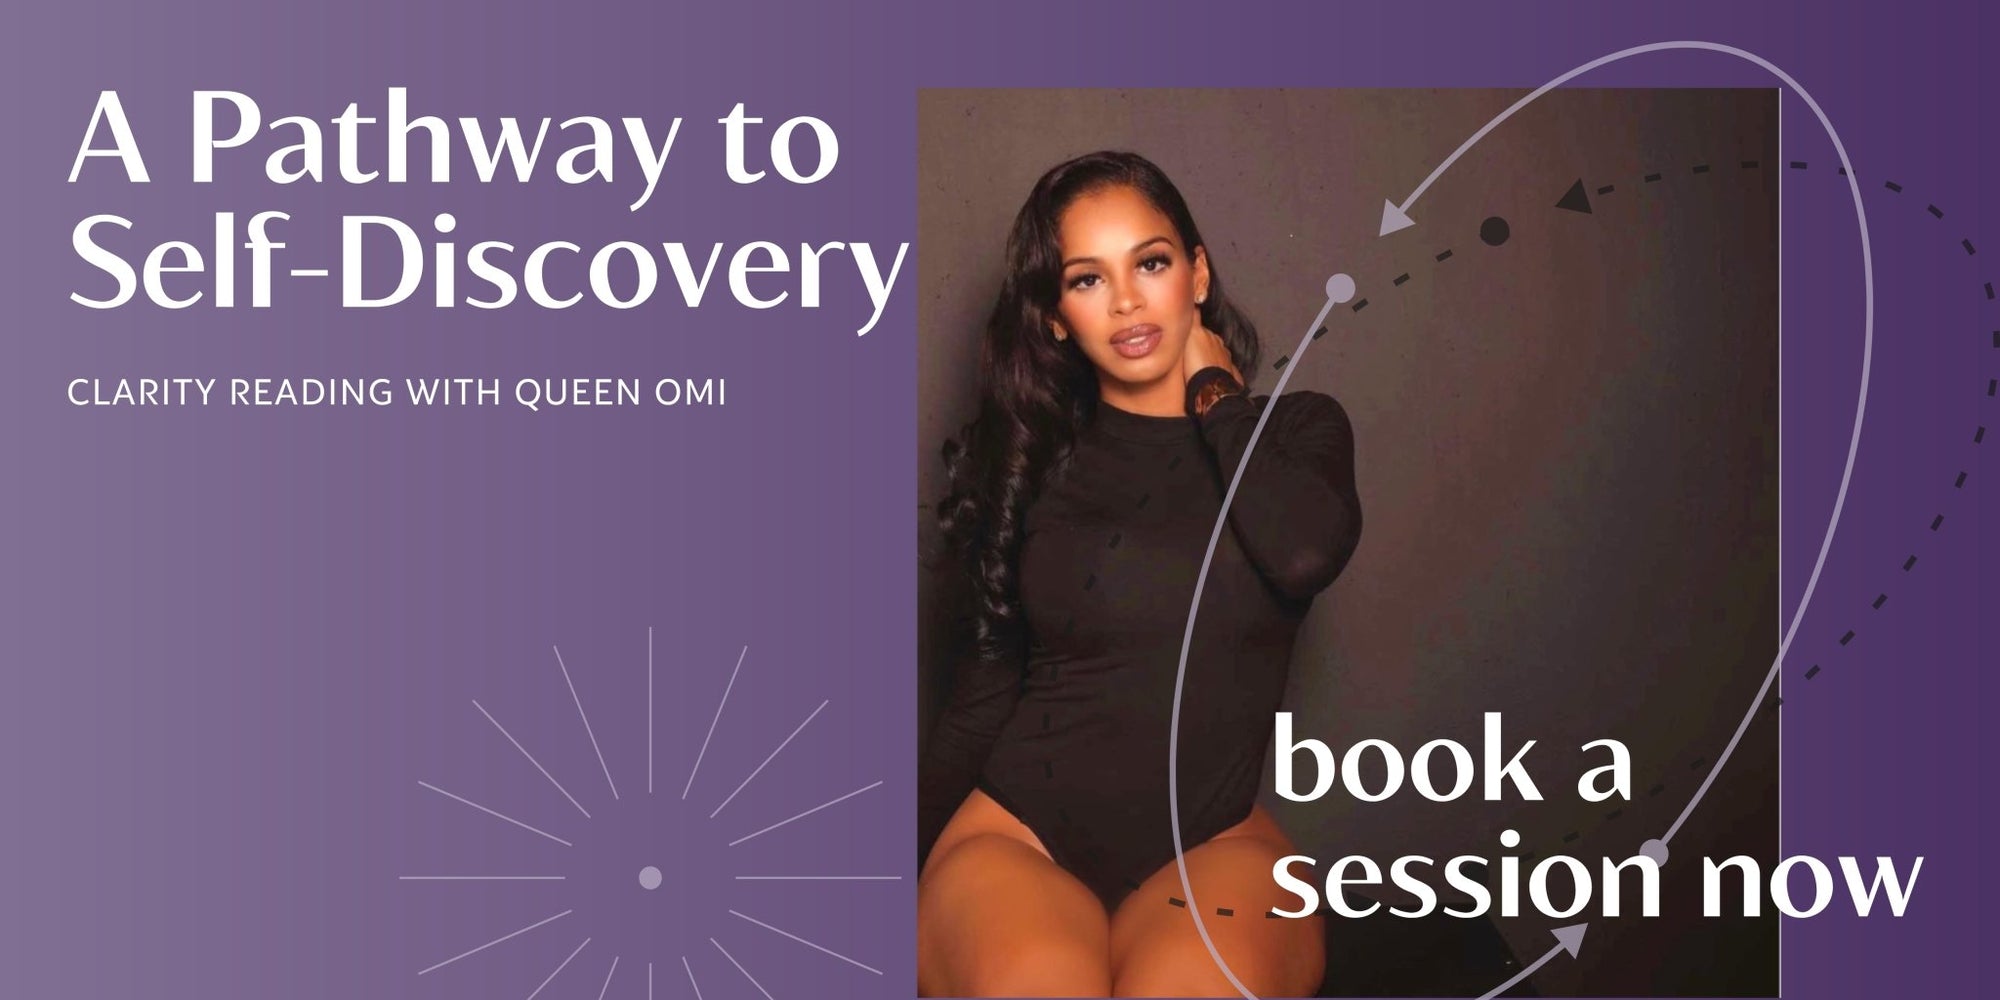 Clarity Readings with Queen Omi: A Pathway to Self-Discovery - OmBodyandSoul